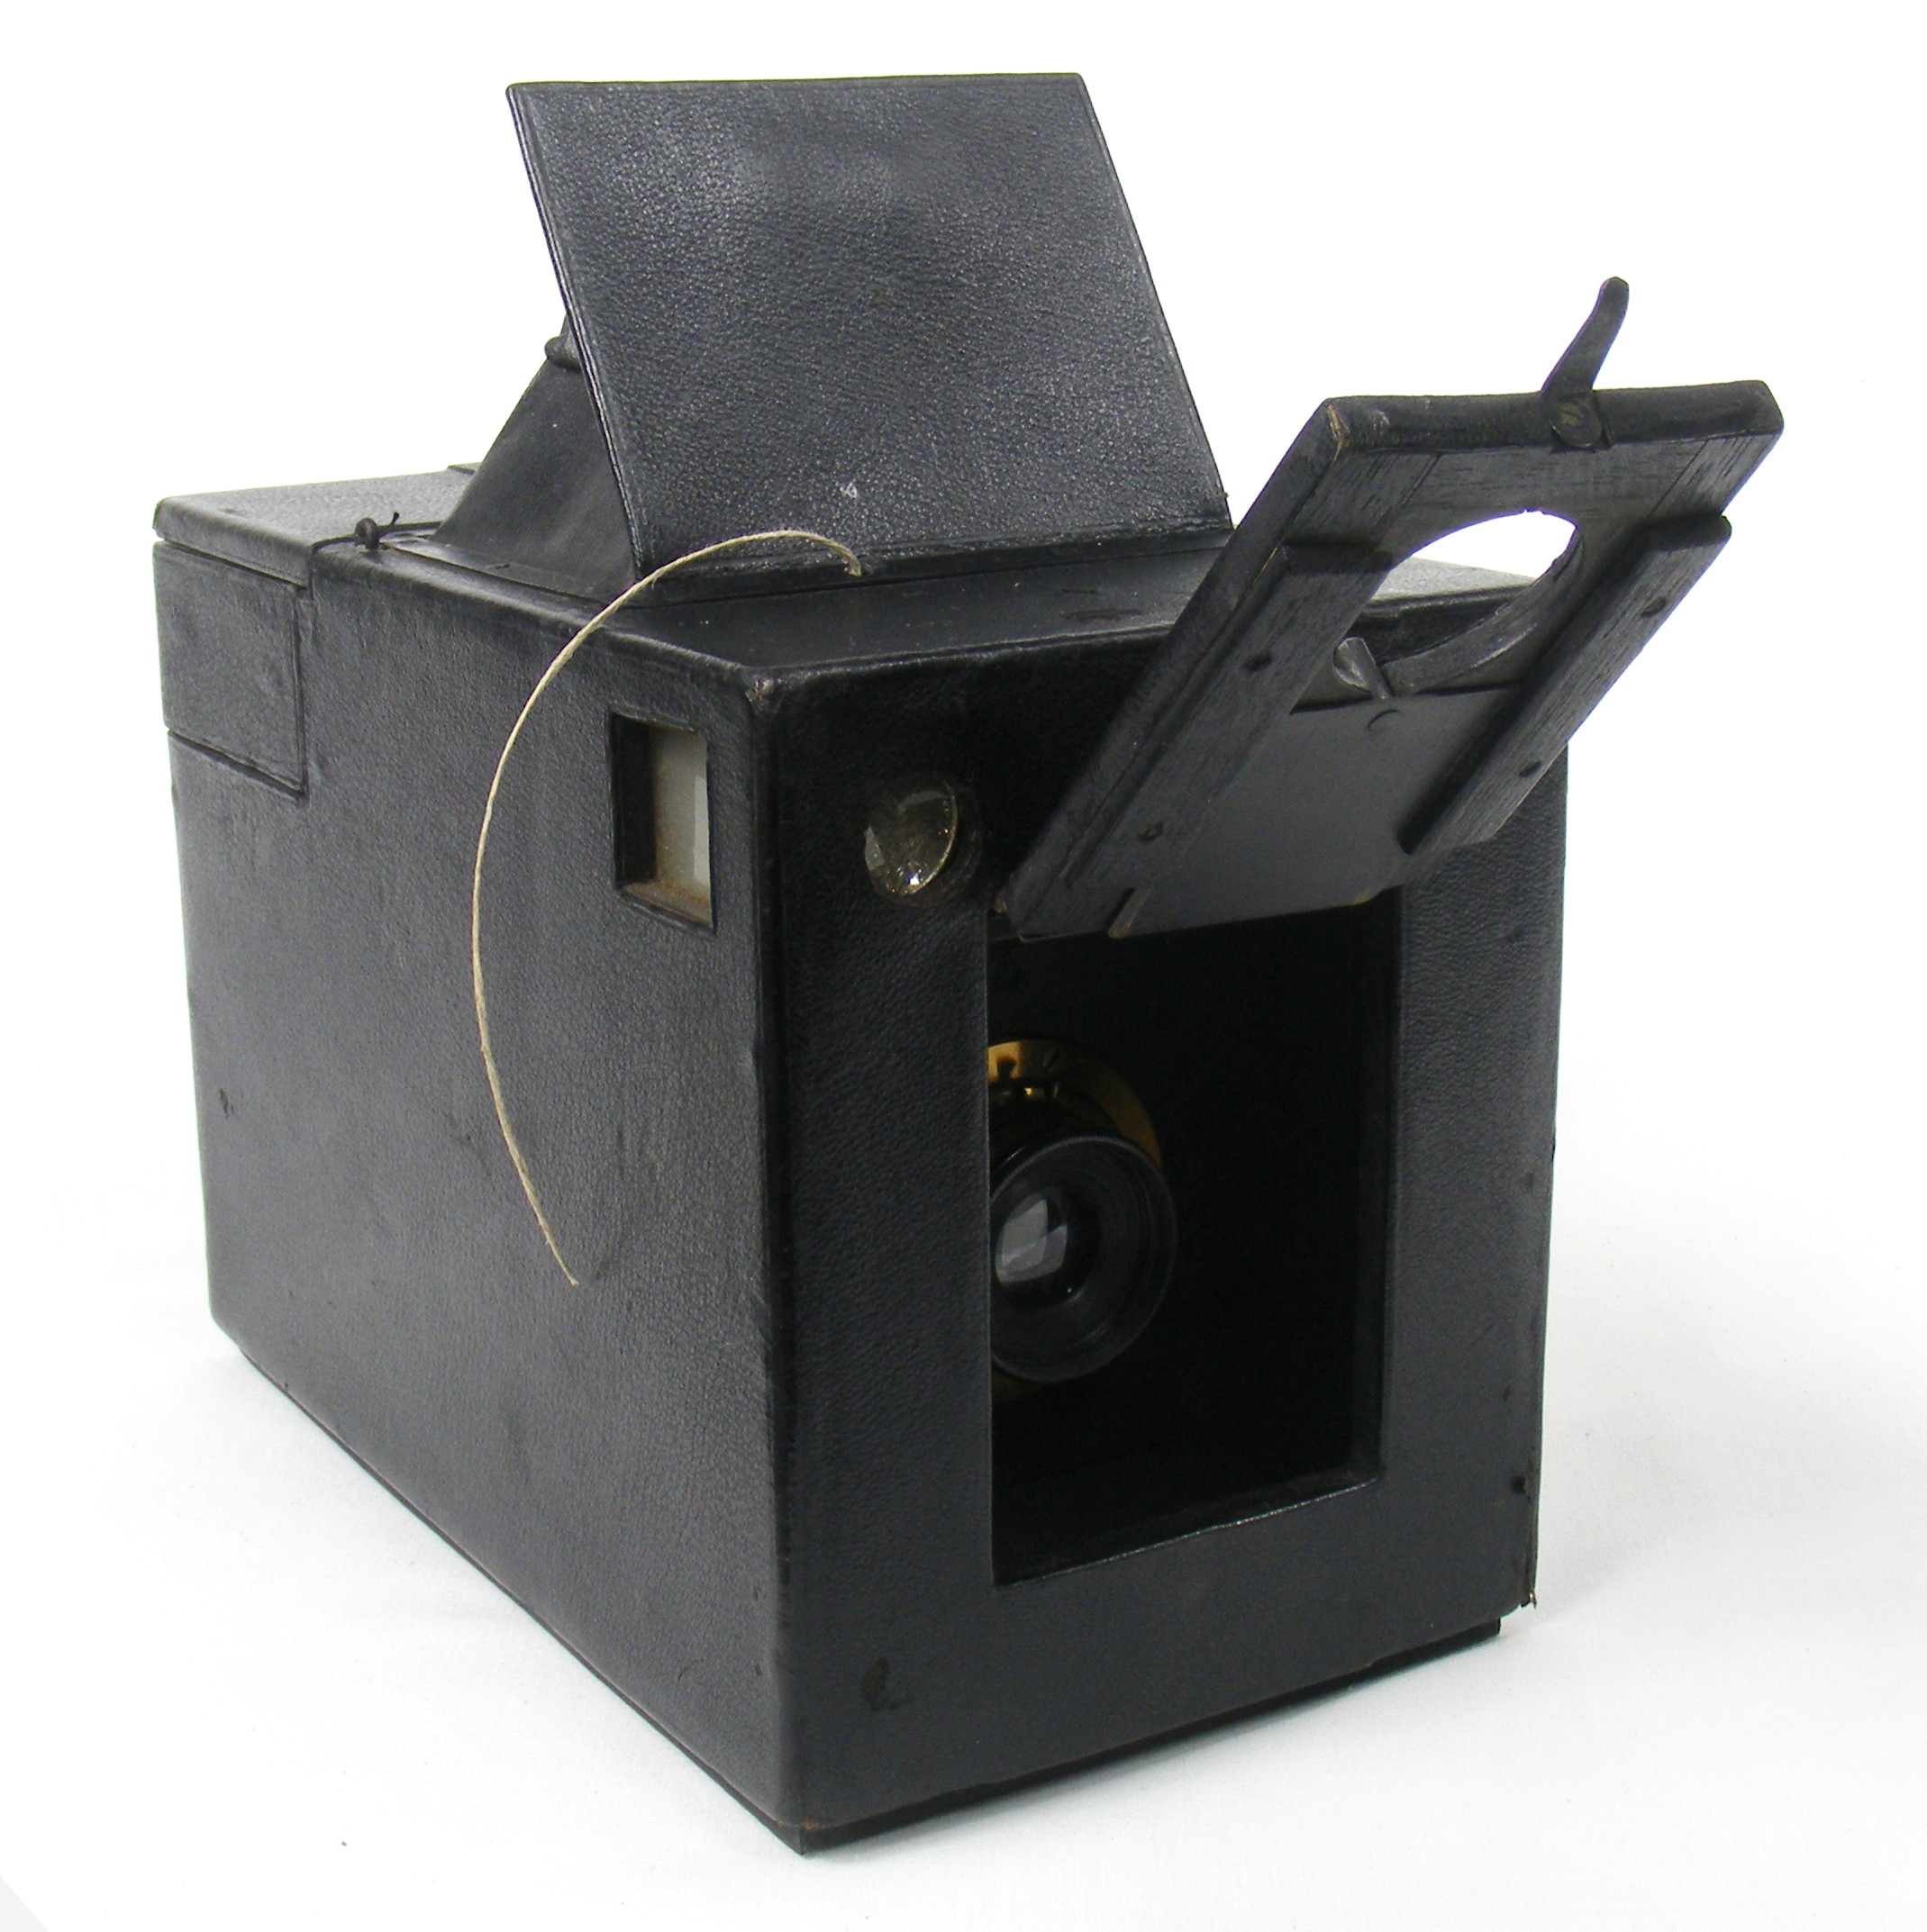 Image of Watson Vanneck camera (front view)